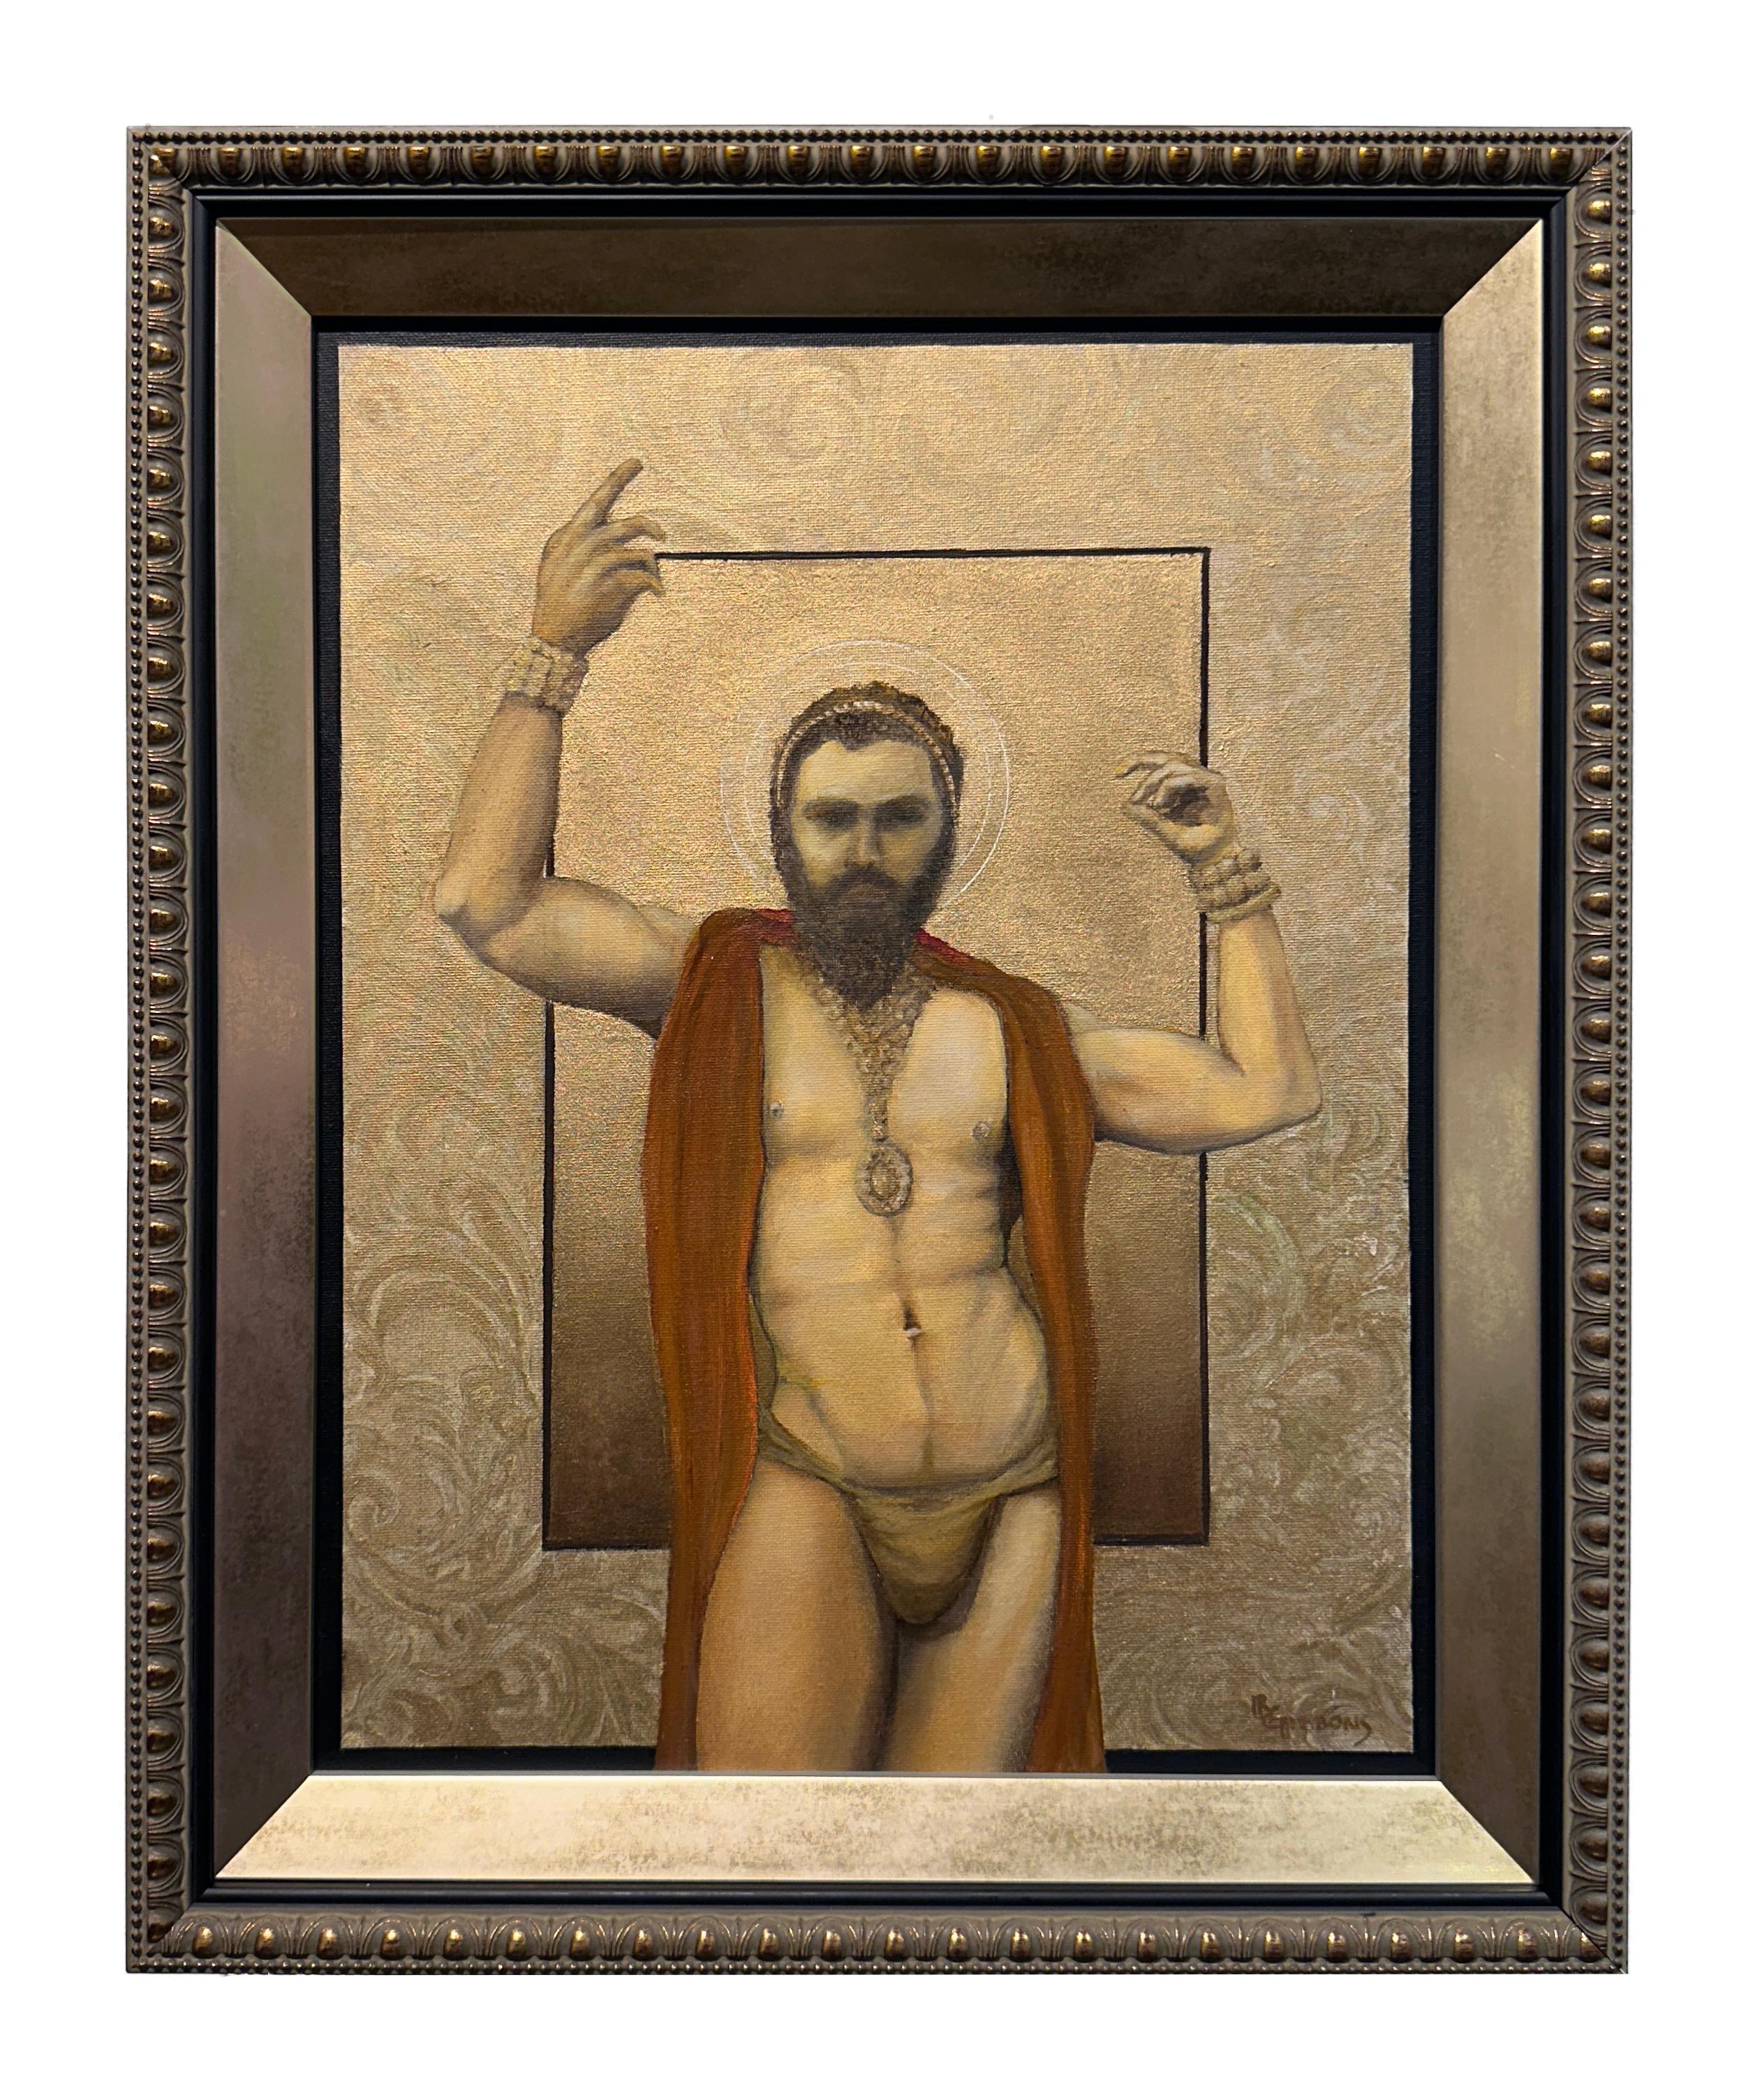 Figurative Painting Richard Gibbons - The Priest King of Knossos, Muscular Male, Original Oil on Canvas